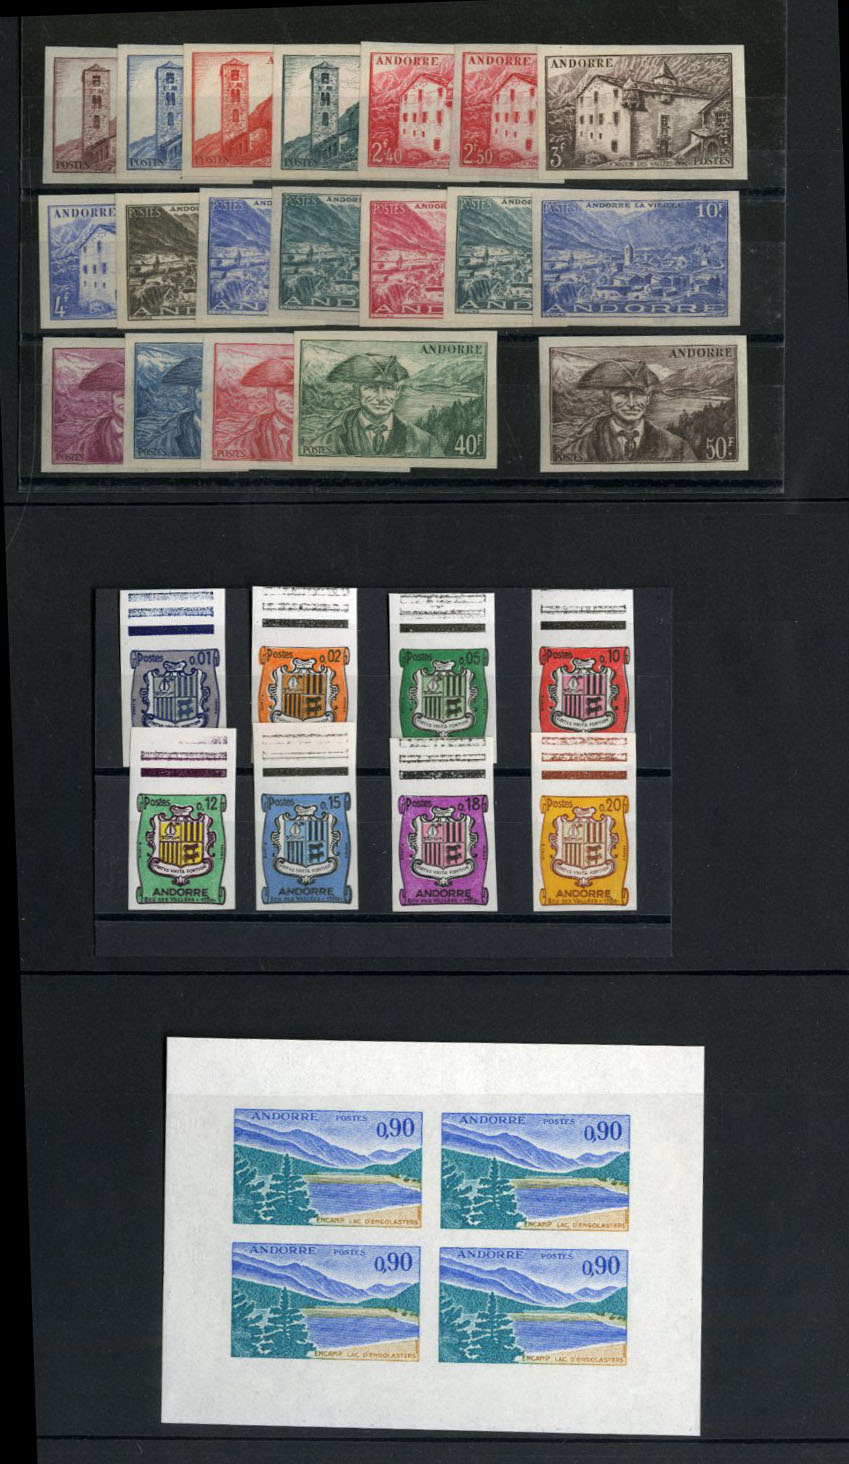 Lot 1405 - LARGE LOTS AND COLLECTIONS FRENCH COLONIES  -  Cherrystone Auctions U.S. & Worldwide Stamps & Postal History